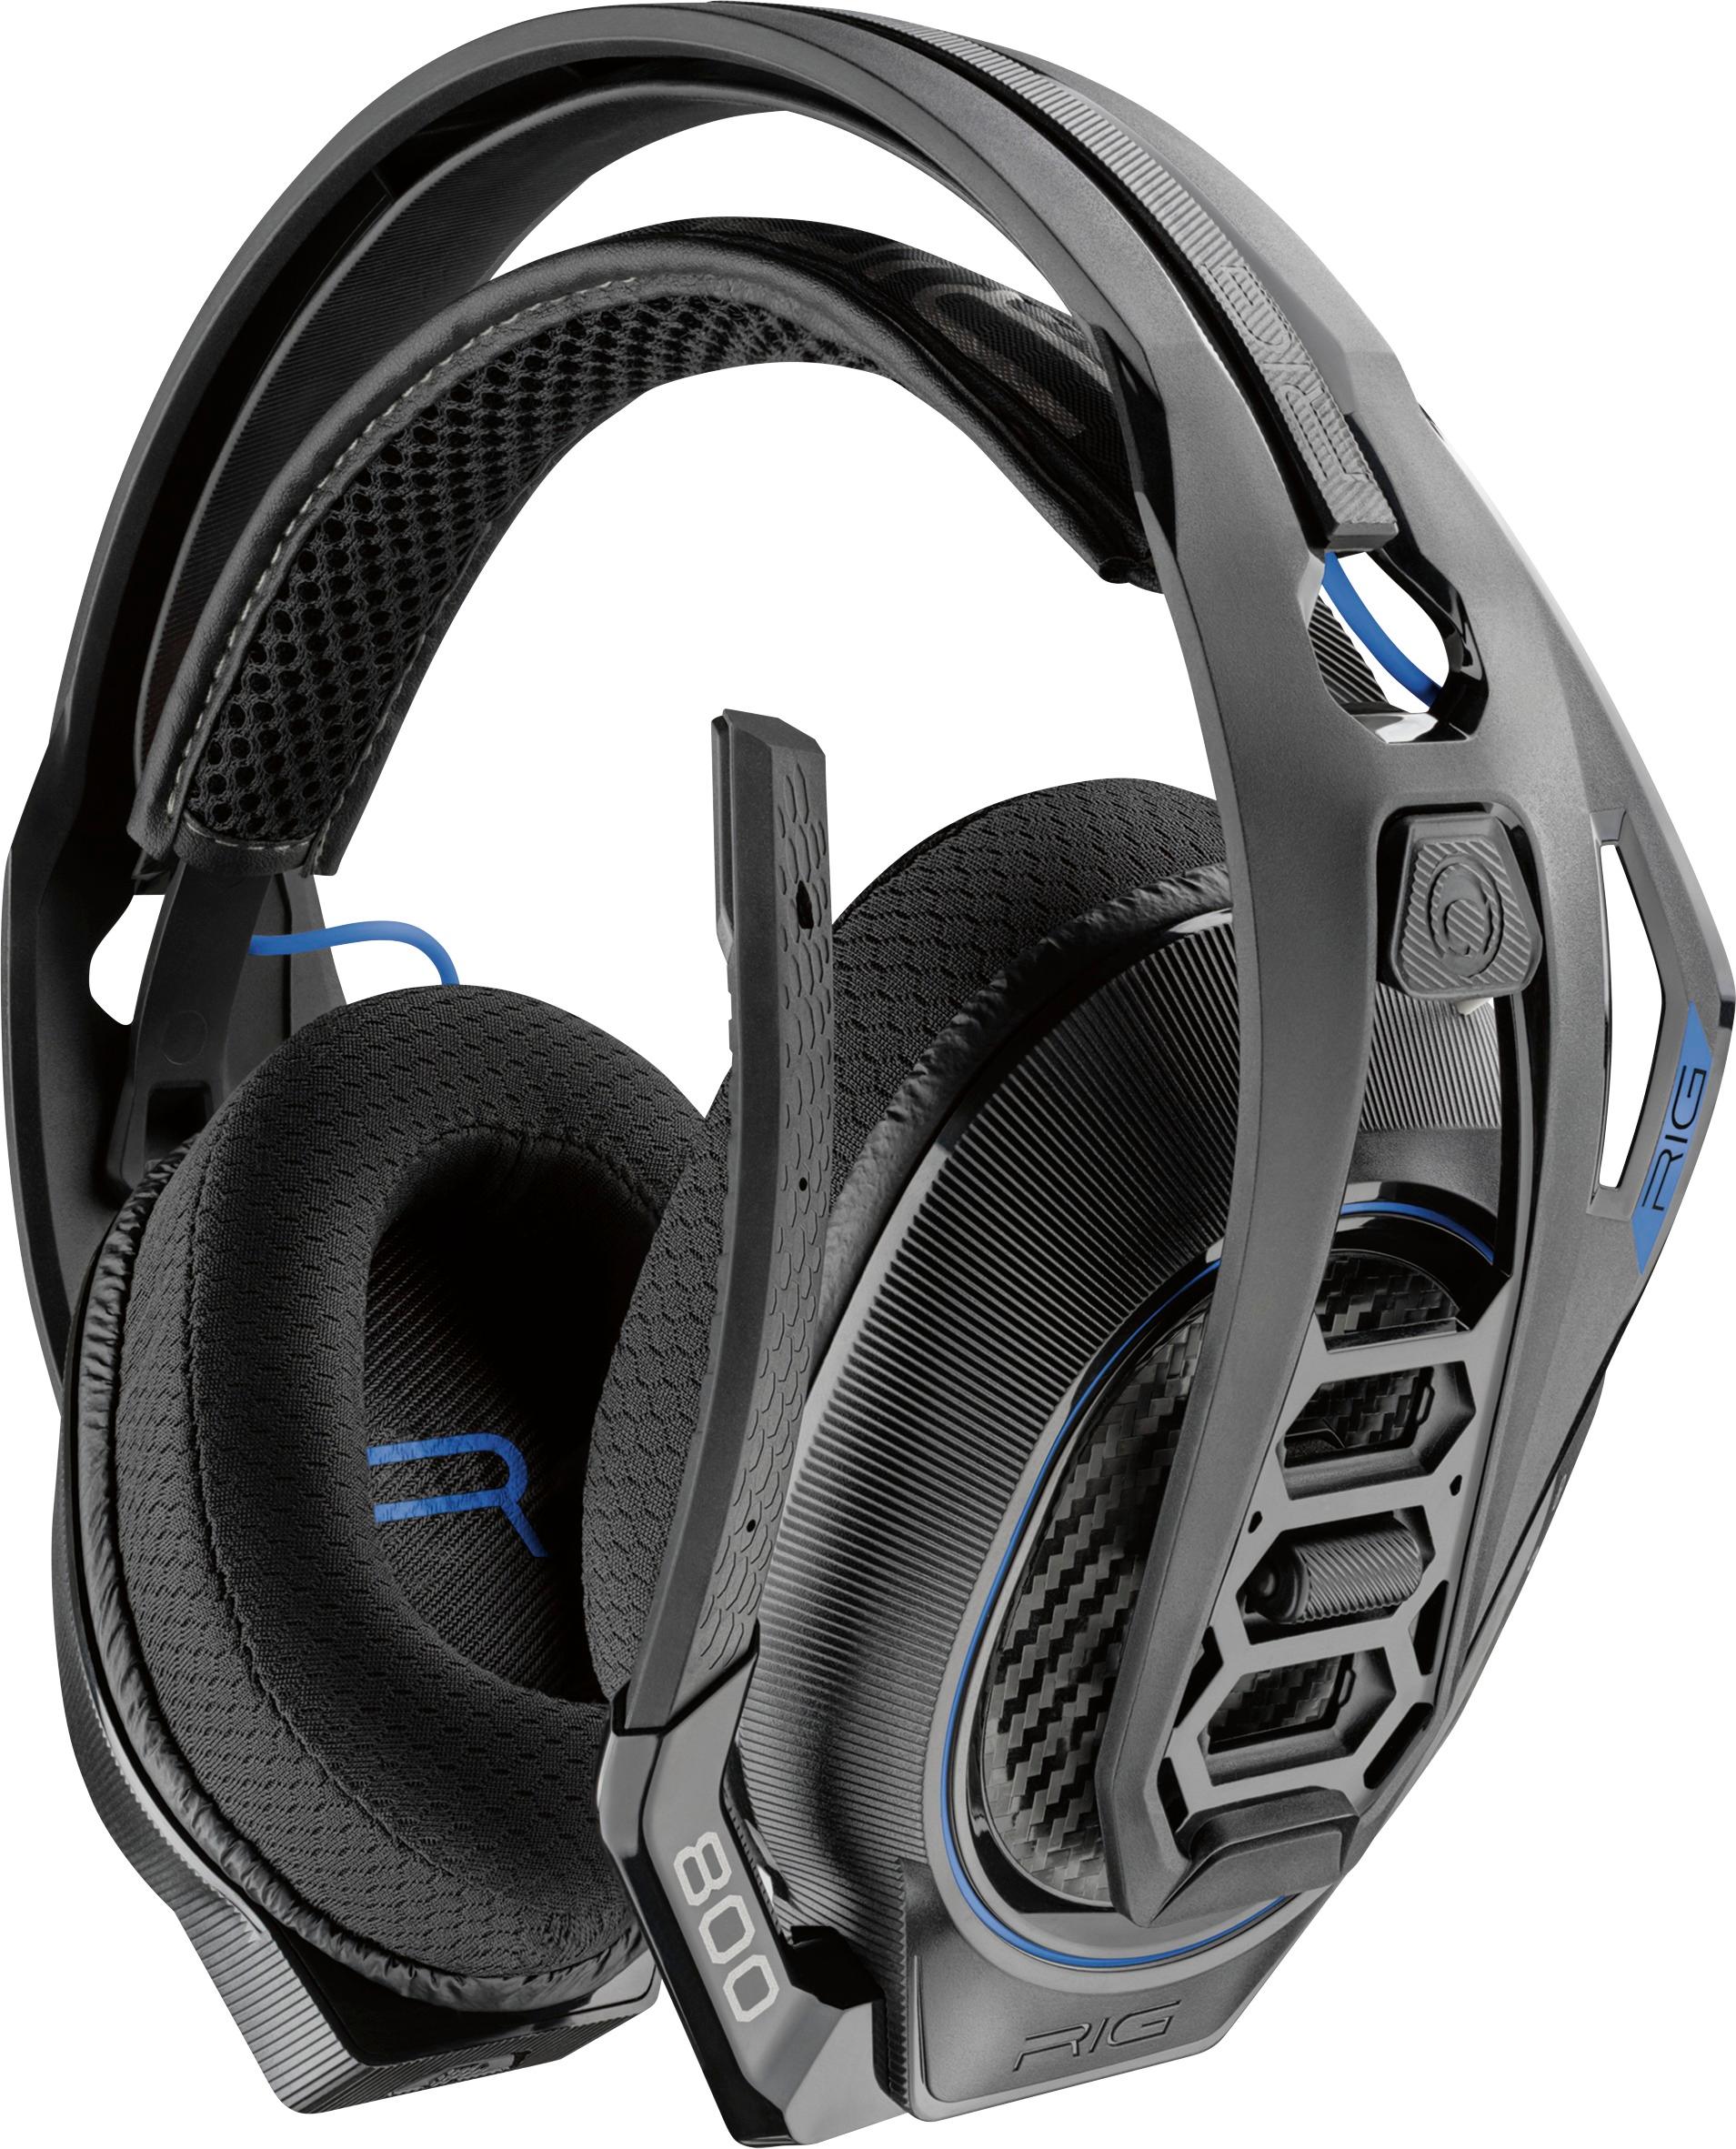 most expensive headset for ps4